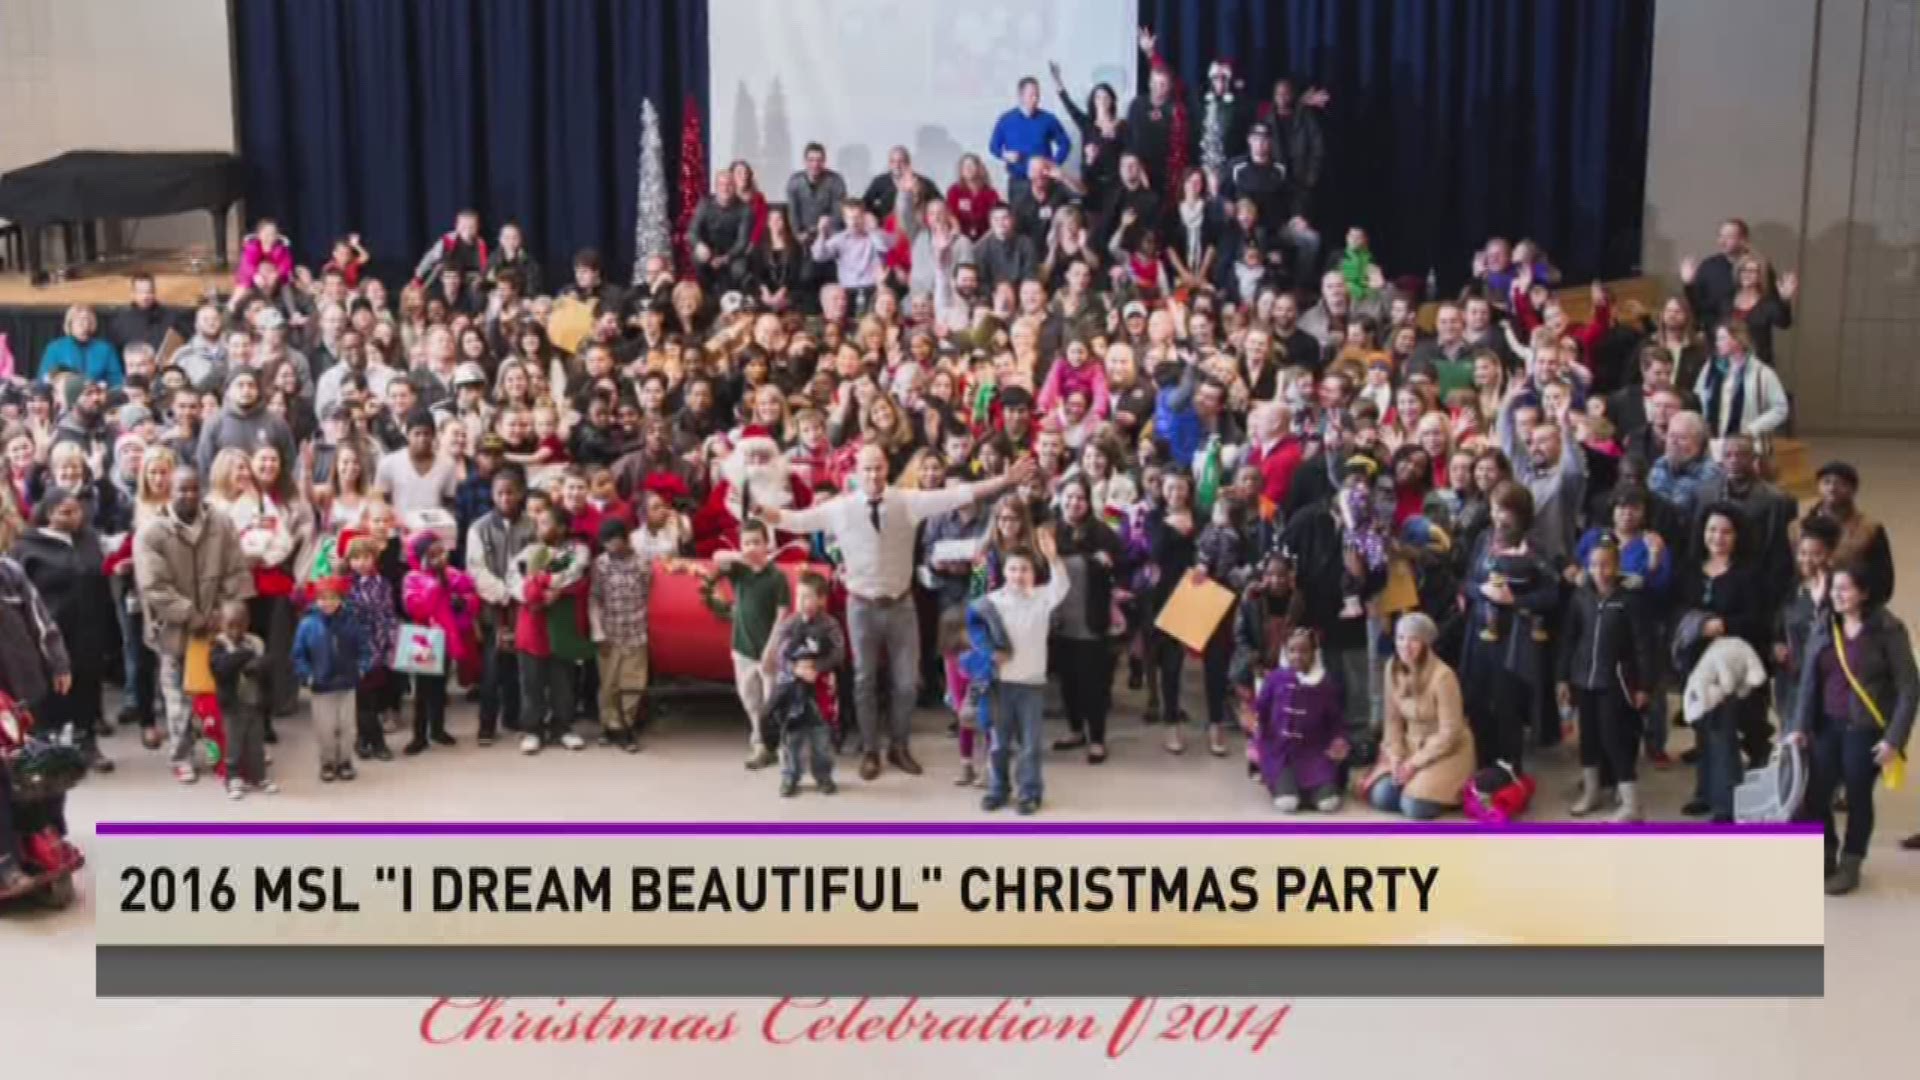 2016 MSL "I Dream Beautiful" Christmas Party